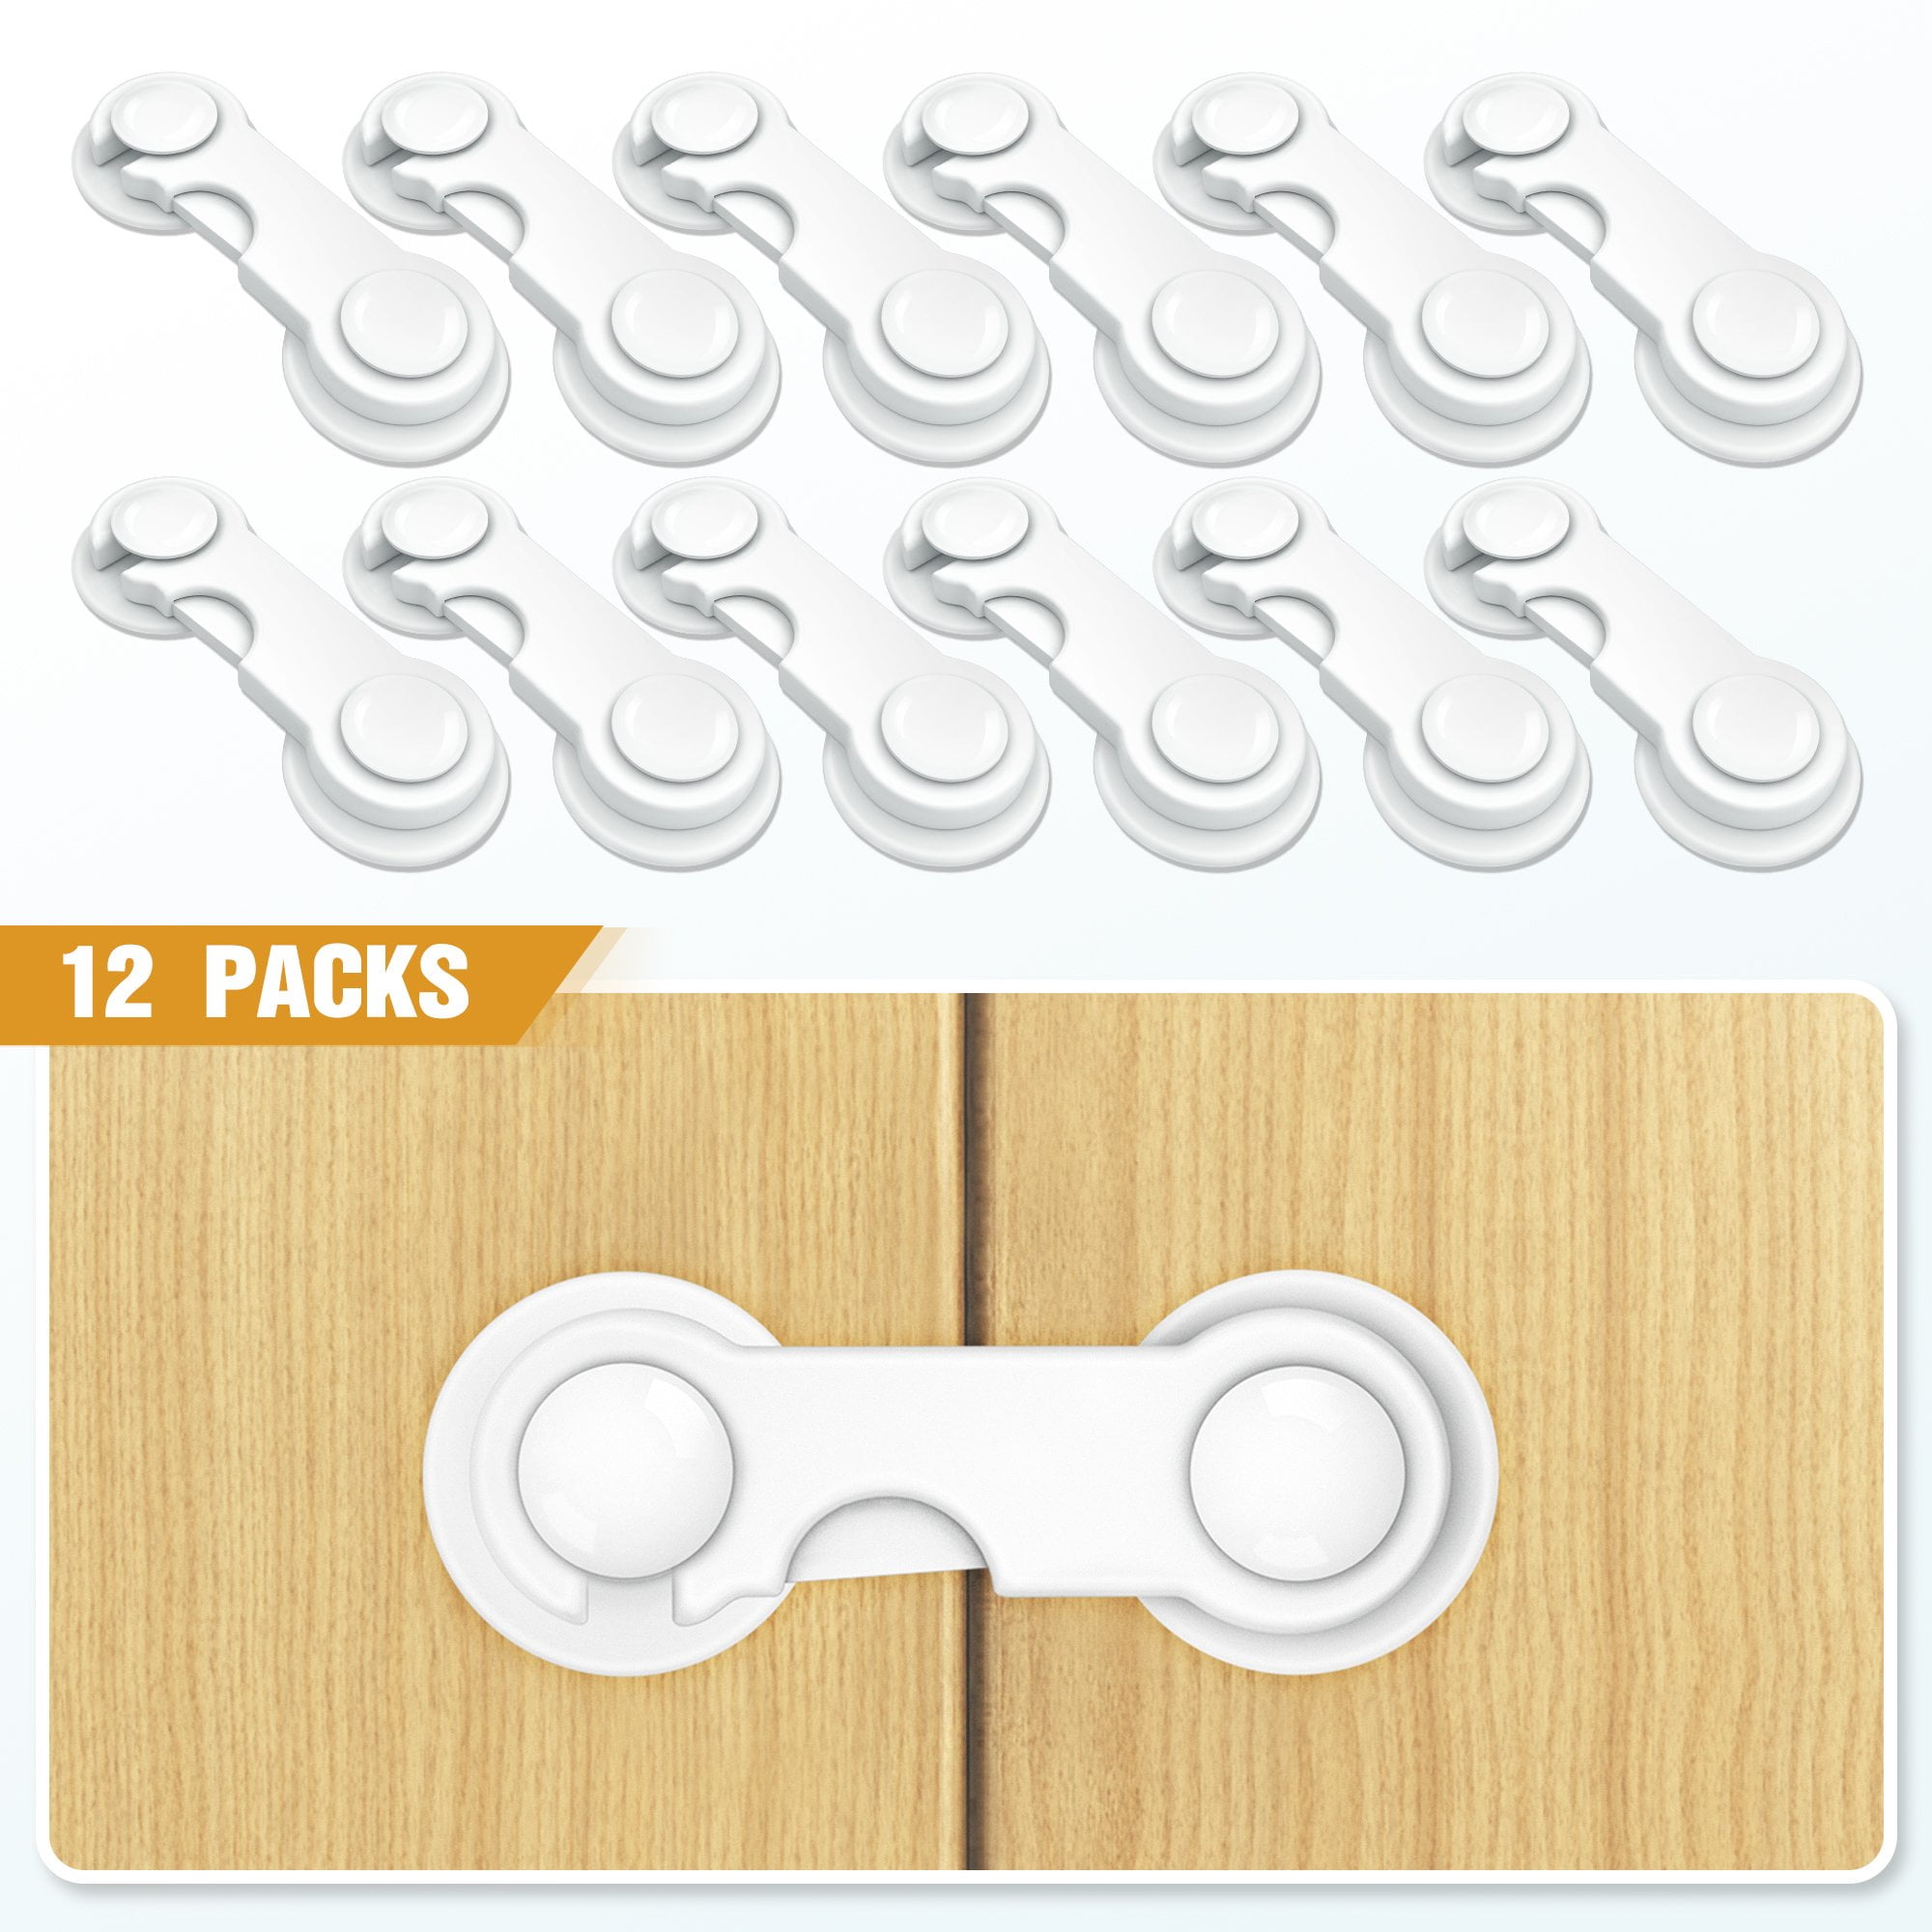 Wholesale 4 Pack Child Proof Safety Locks for Drawers Baby Proof